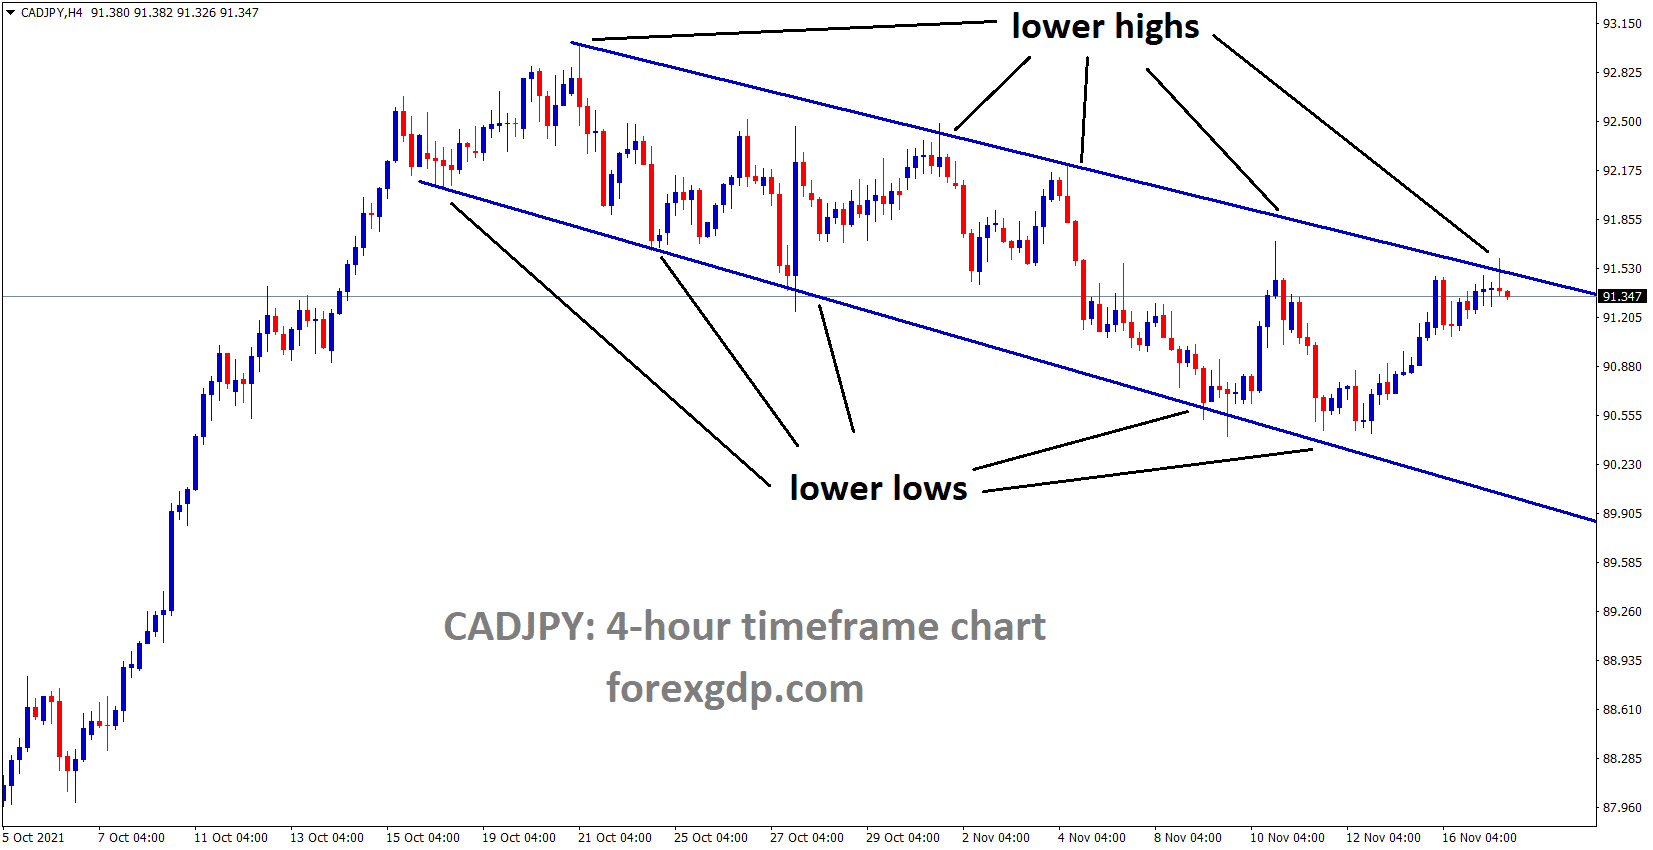 CADJPY is moving in the Descending channel and market consolidating at the Lower high of the channel